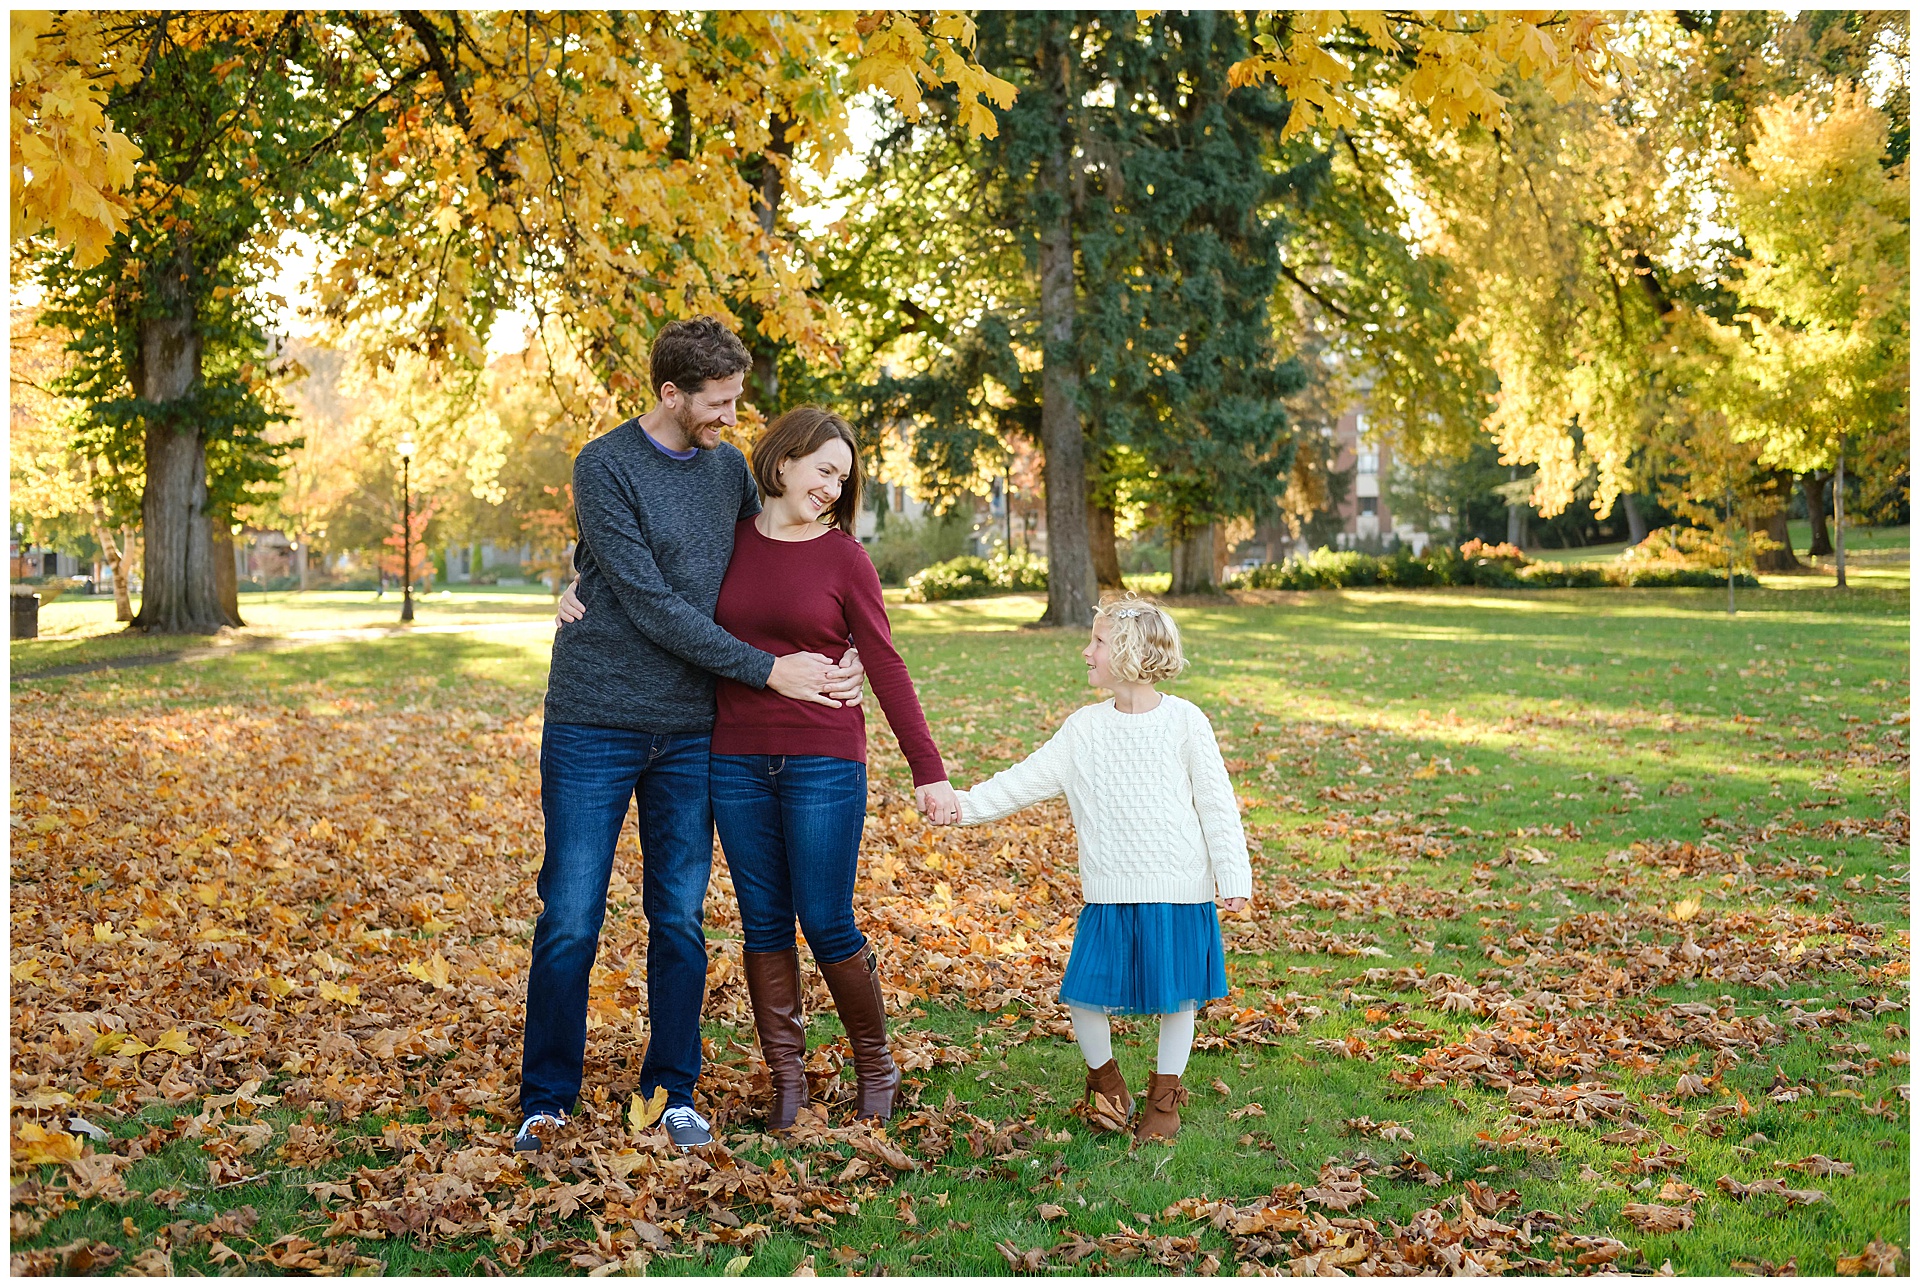 Fall family portraits in Corvallis Oregon by Portland photographer Alison Smith